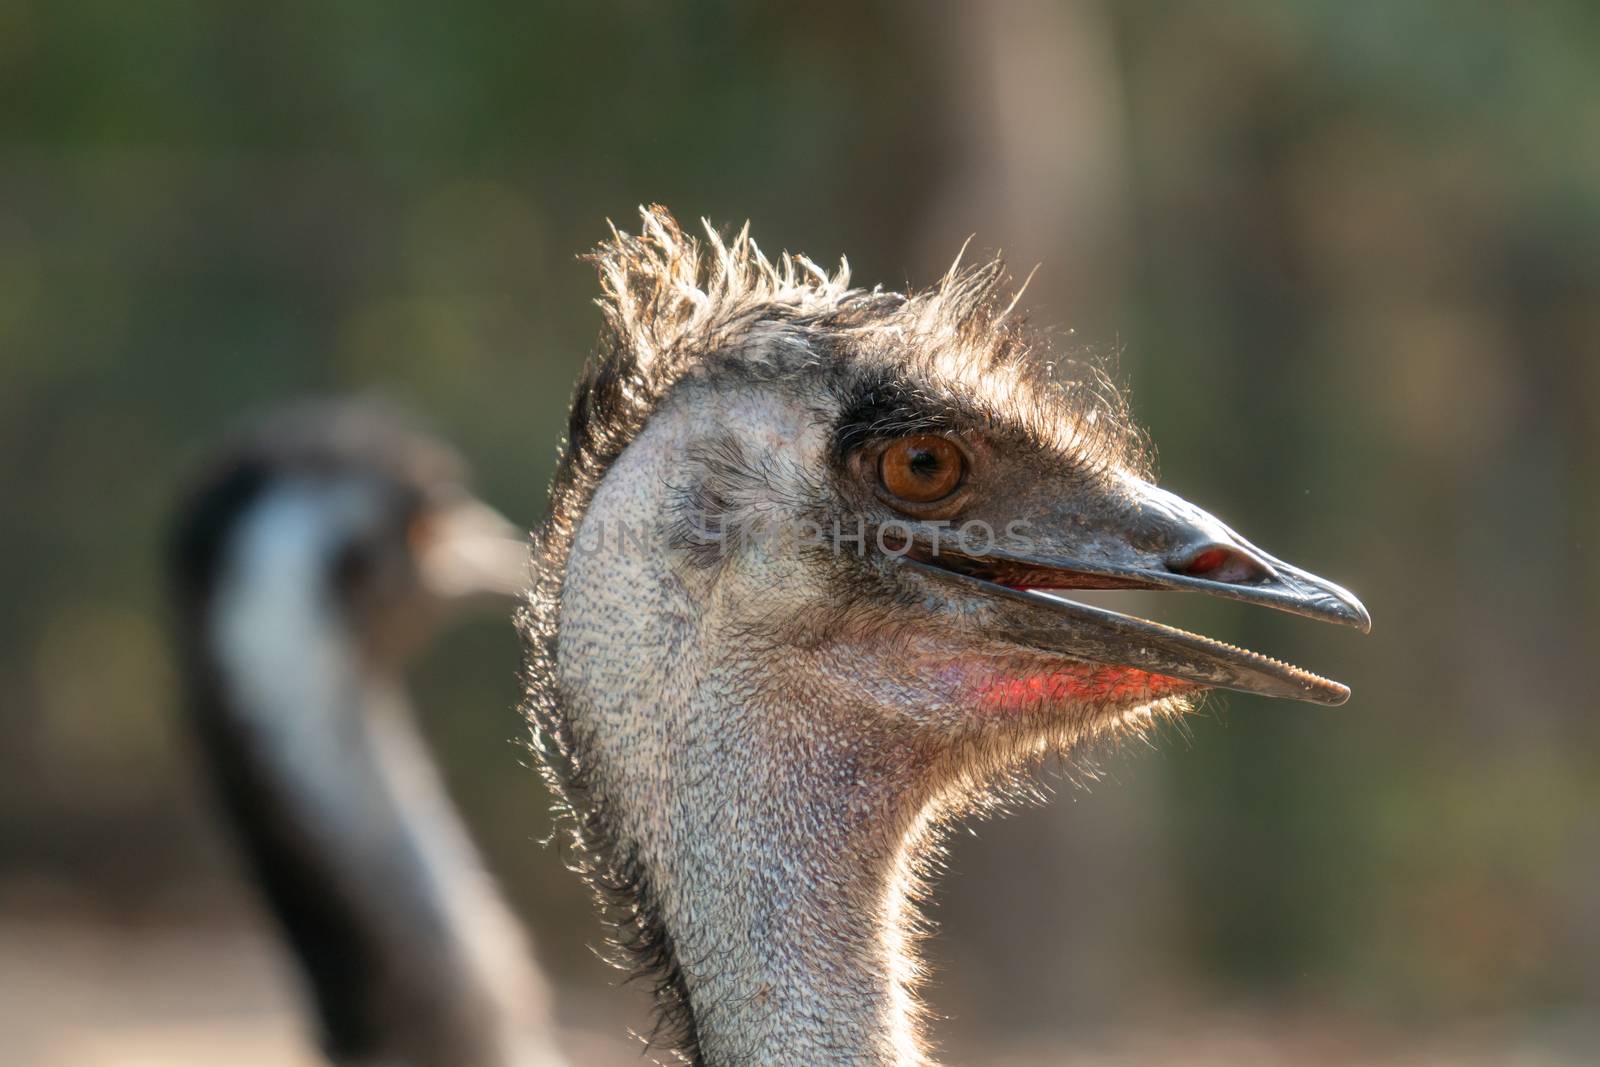 Close up of the head and neck of an emu